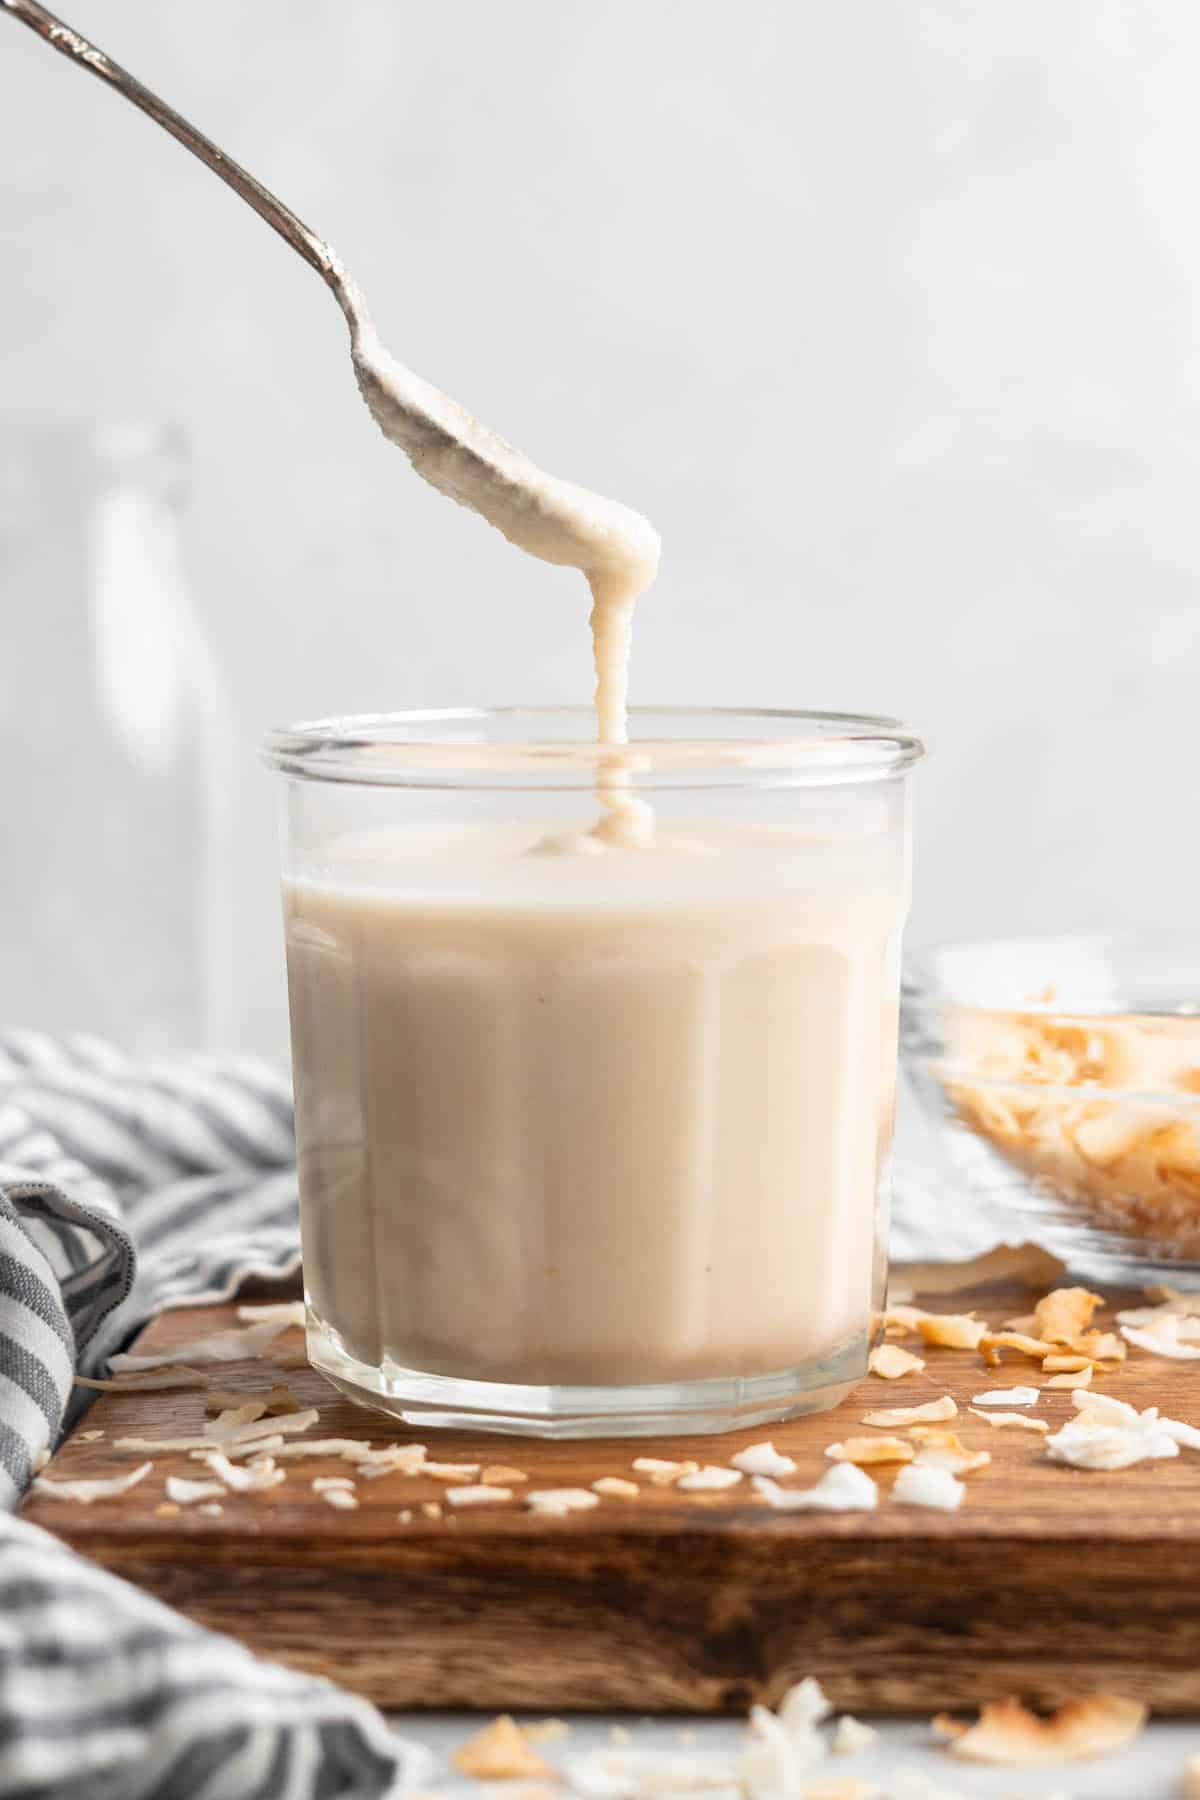 Spoon drizzling coconut butter into jar